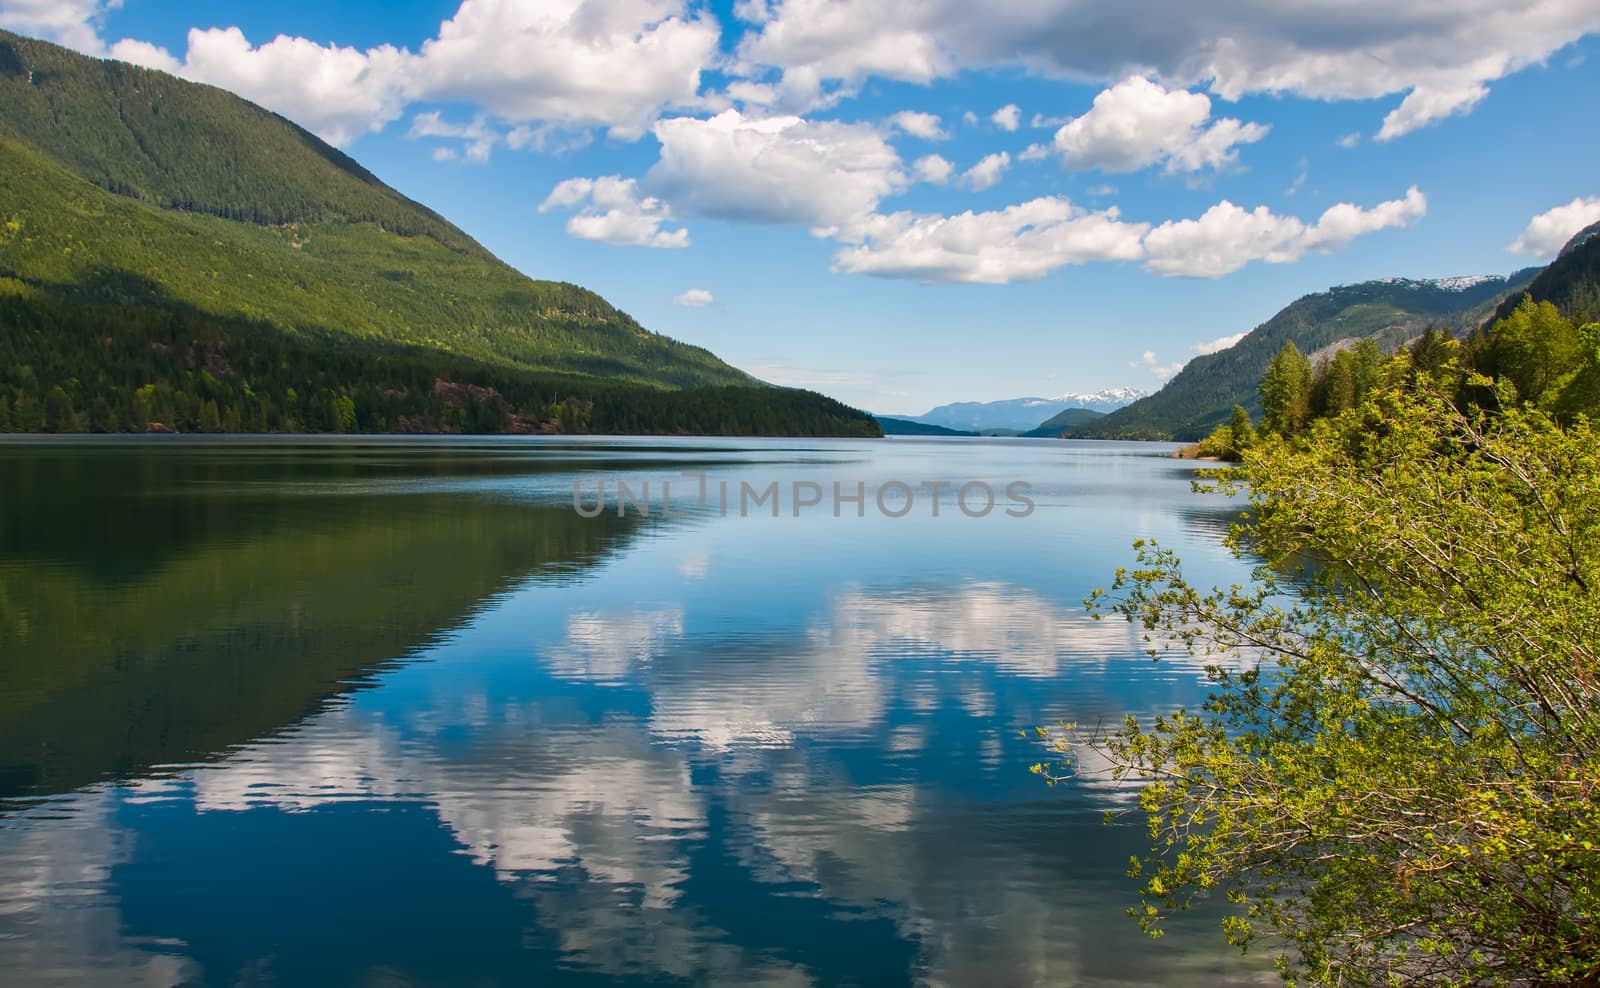 Fluffy clouds reflected in a tranquil lake with mountains in distance